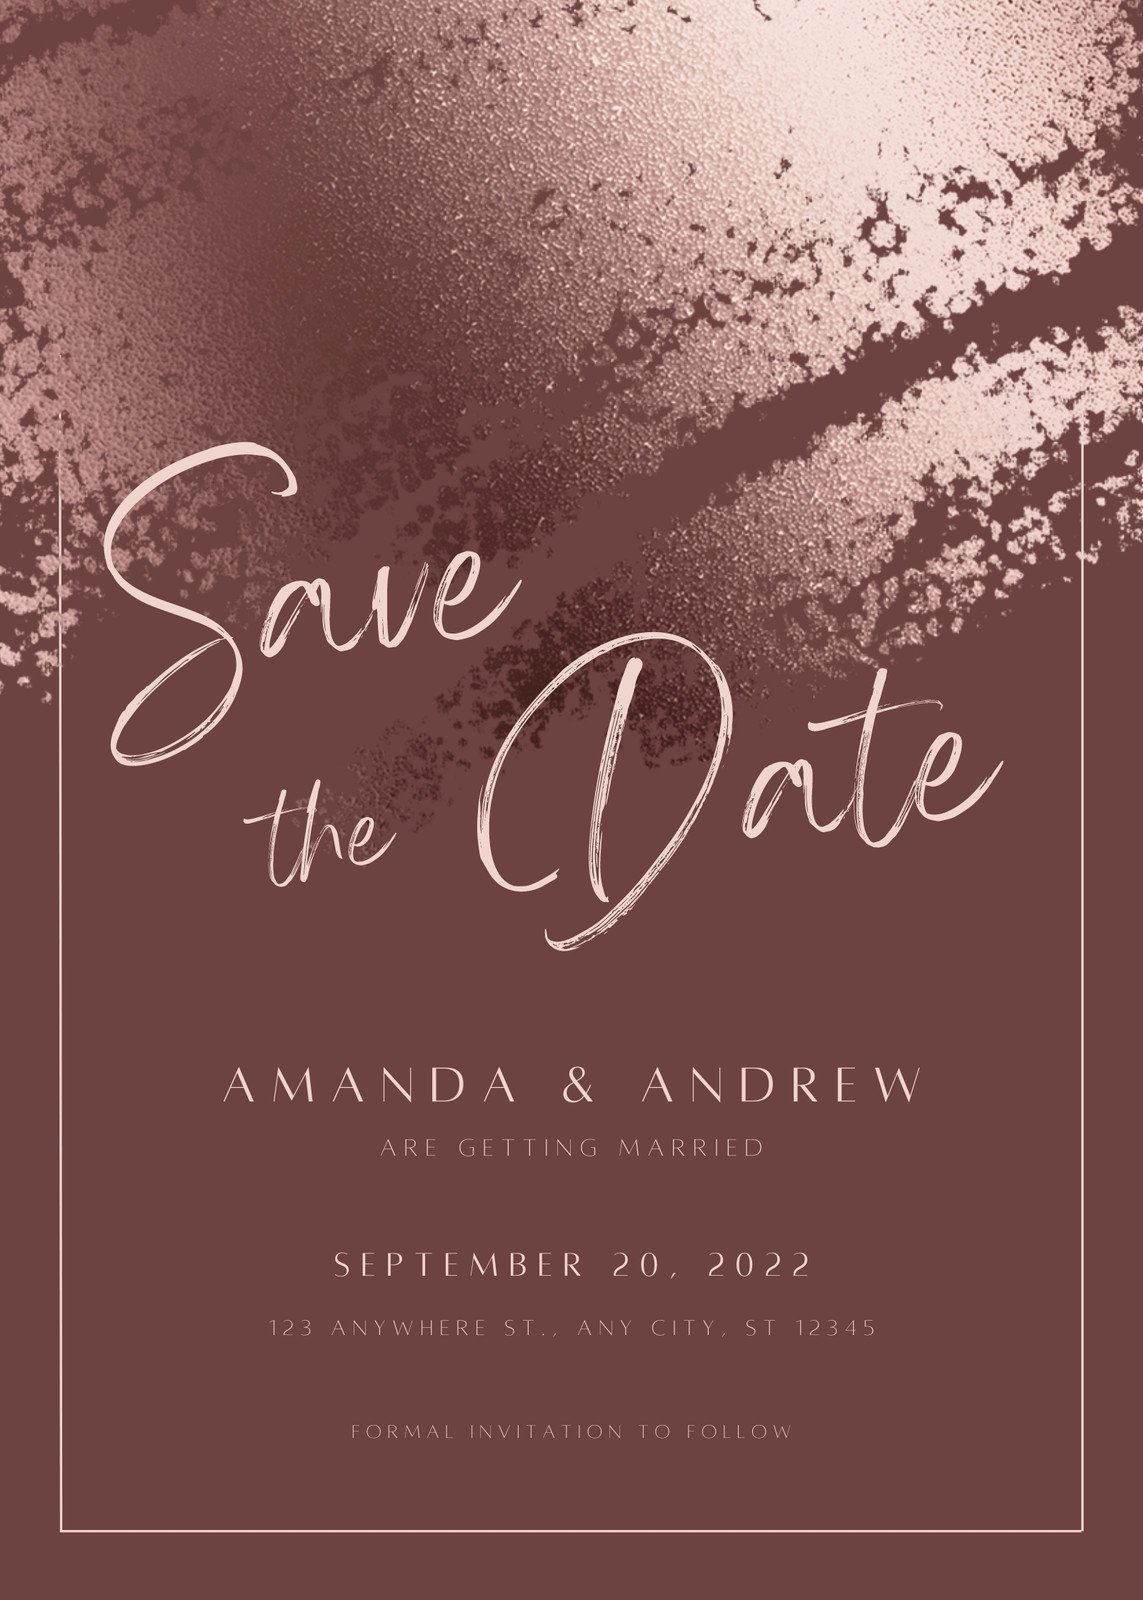 Free save the date card templates to edit and print | Canva